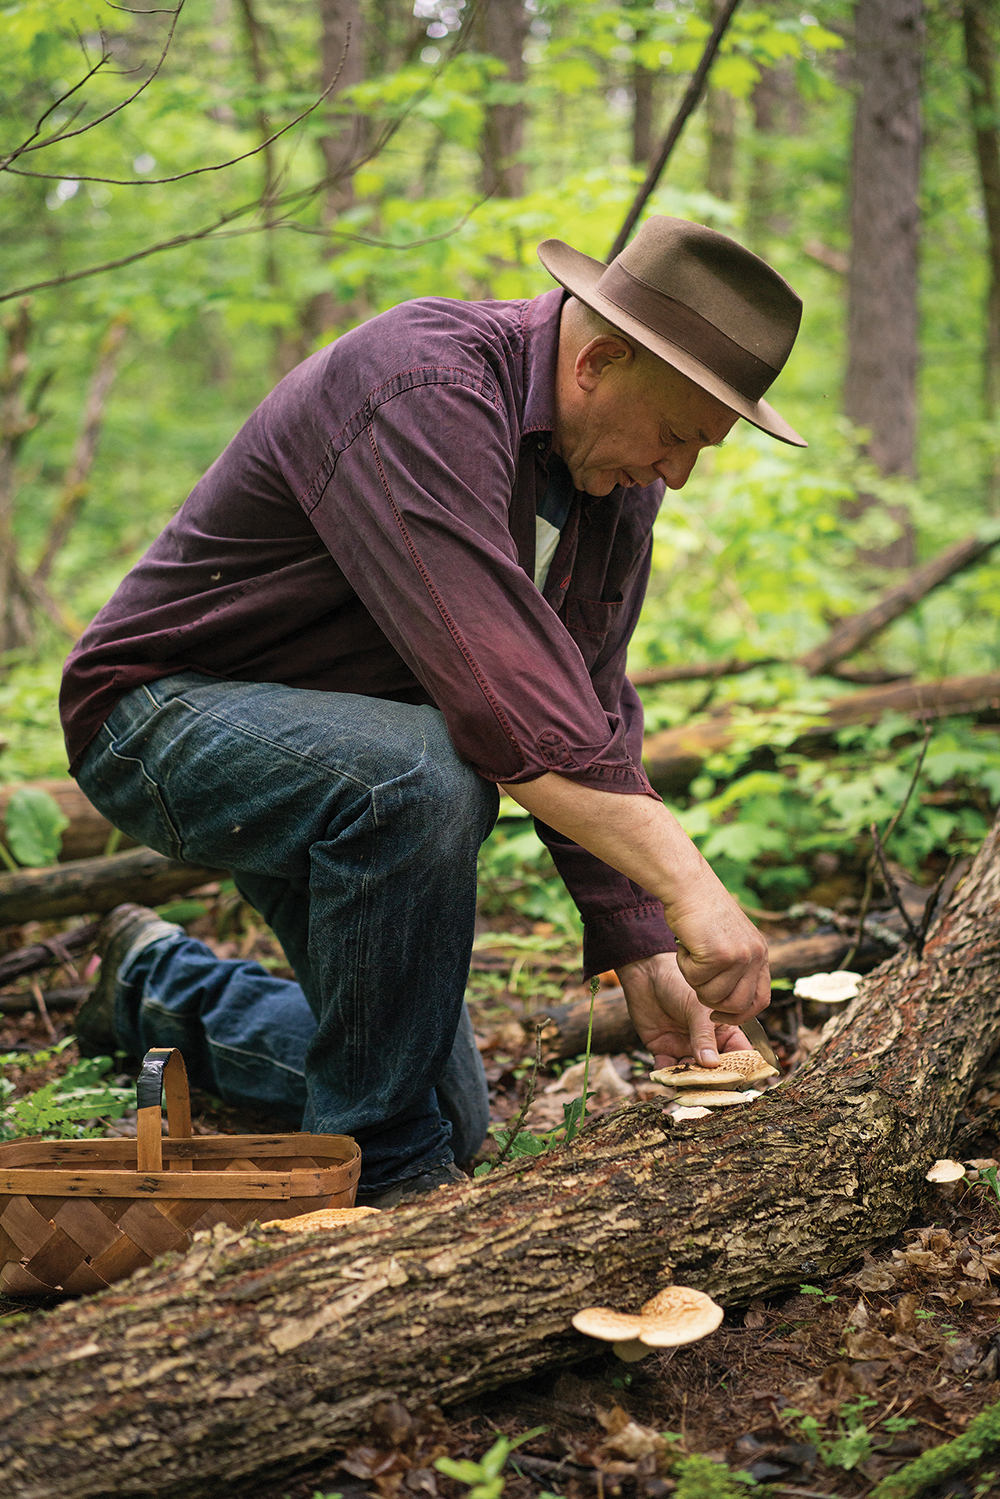 Micheal Stadtländer, a pioneer in the foraging movement. Eco-responsibility and avoiding over-harvesting are key to sustainability.